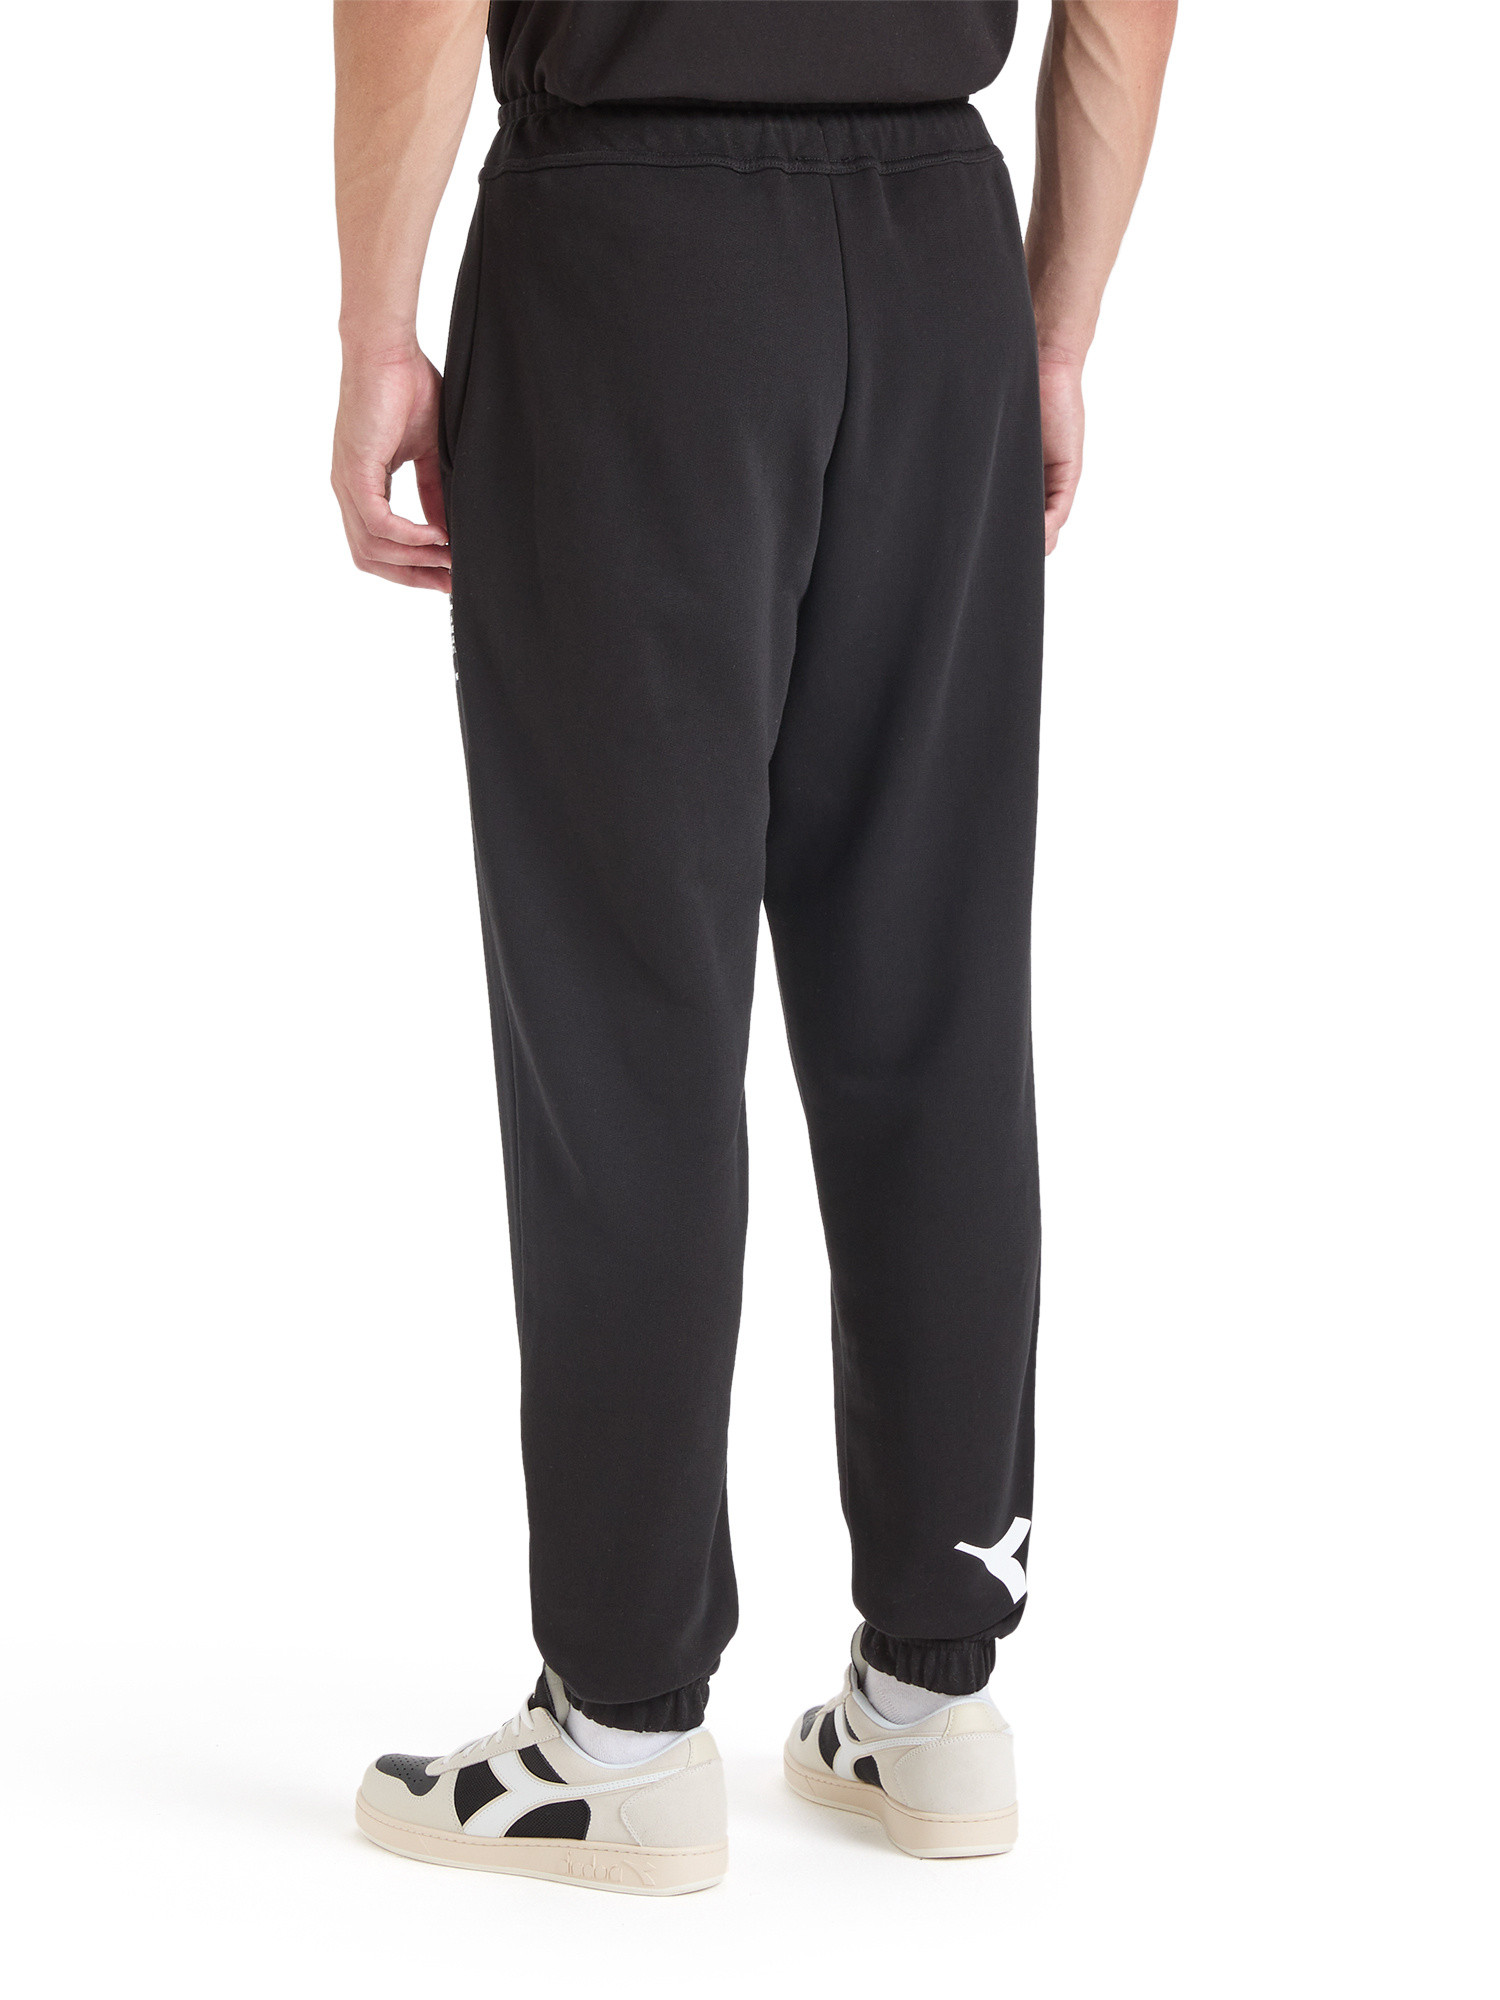 Diadora - Manifesto sports trousers with cotton print, Black, large image number 3